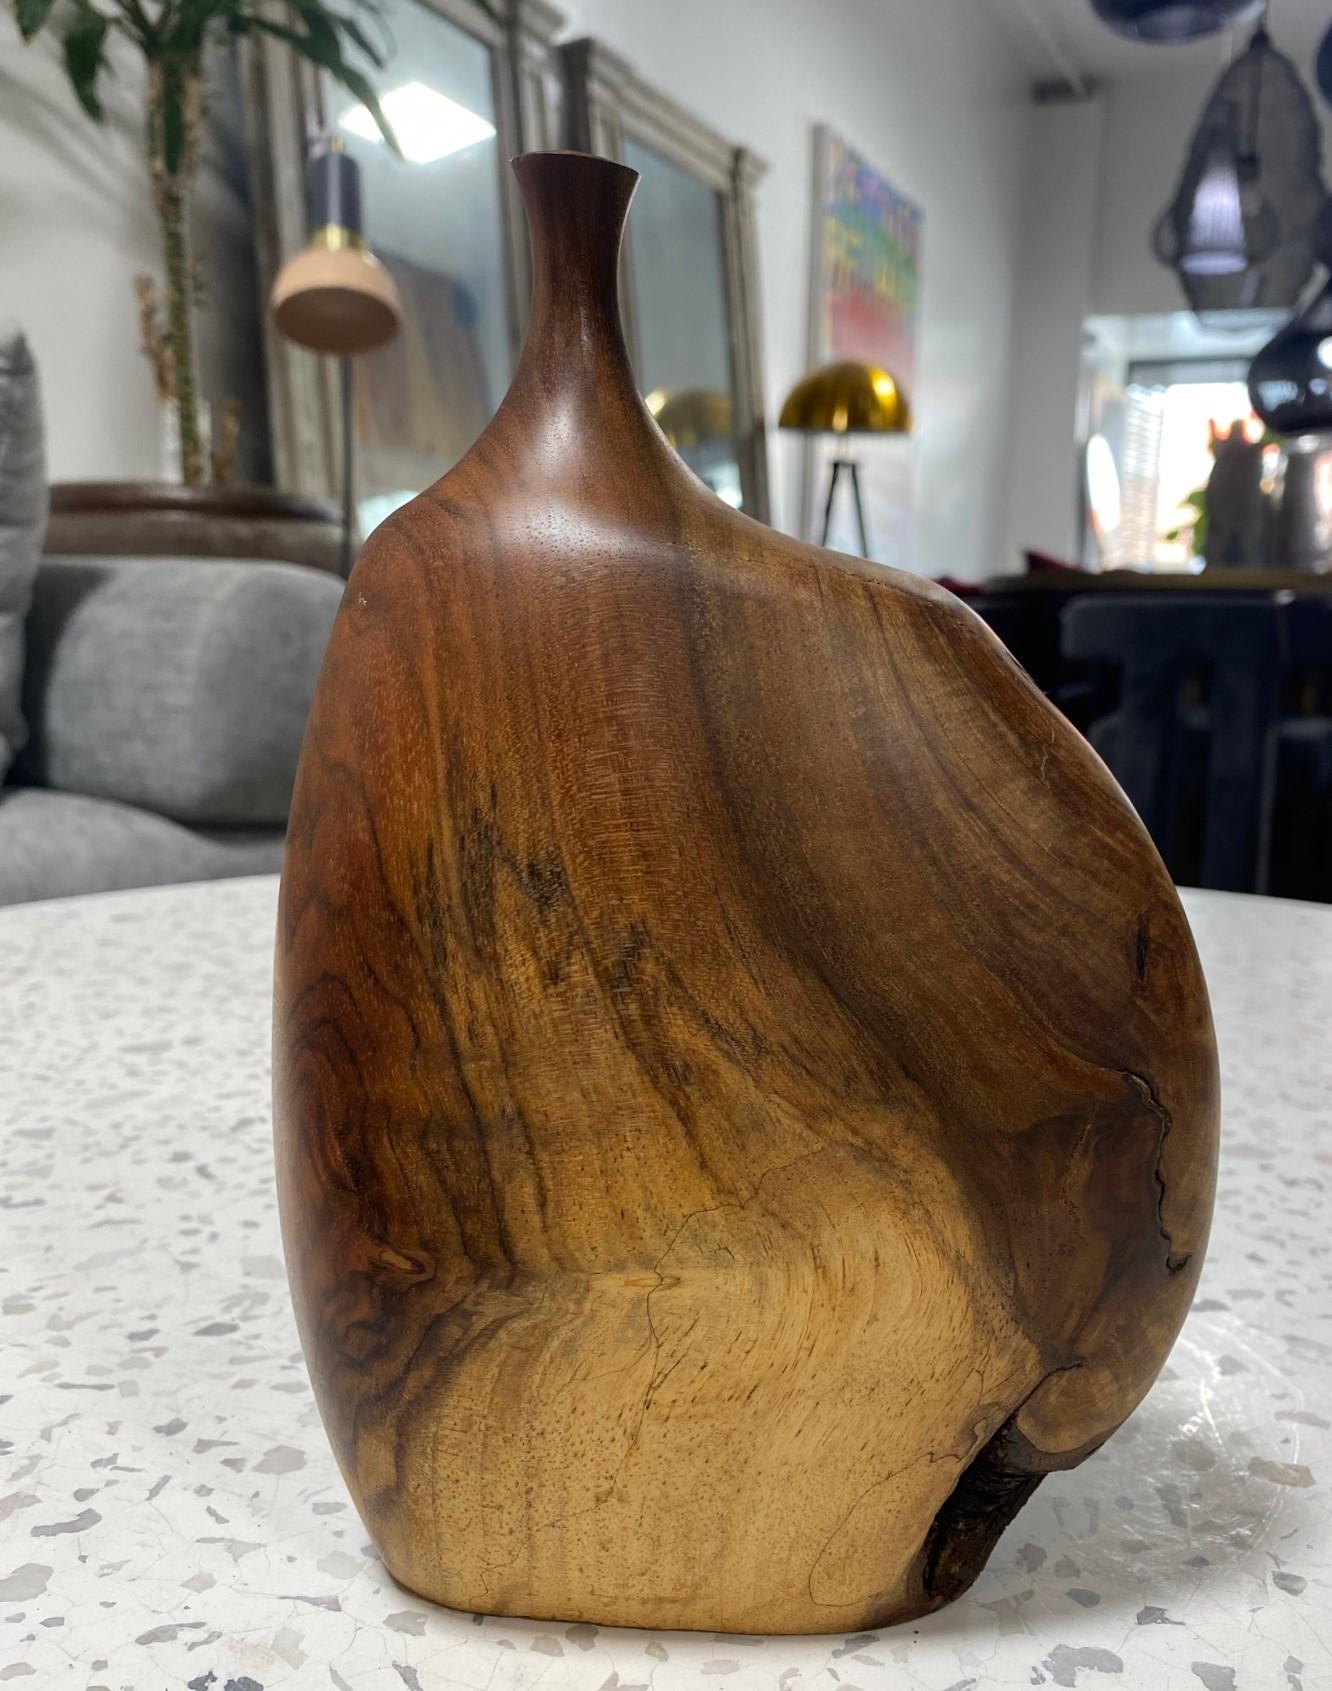 A very beautifully made and sculpted wood-turned weed pot vase by famed American/California (Mendocino, CA) artist/ sculptor Doug Ayers. The organic wood grain and shifting colors are quite spectacular in this piece as are the natural burlwood